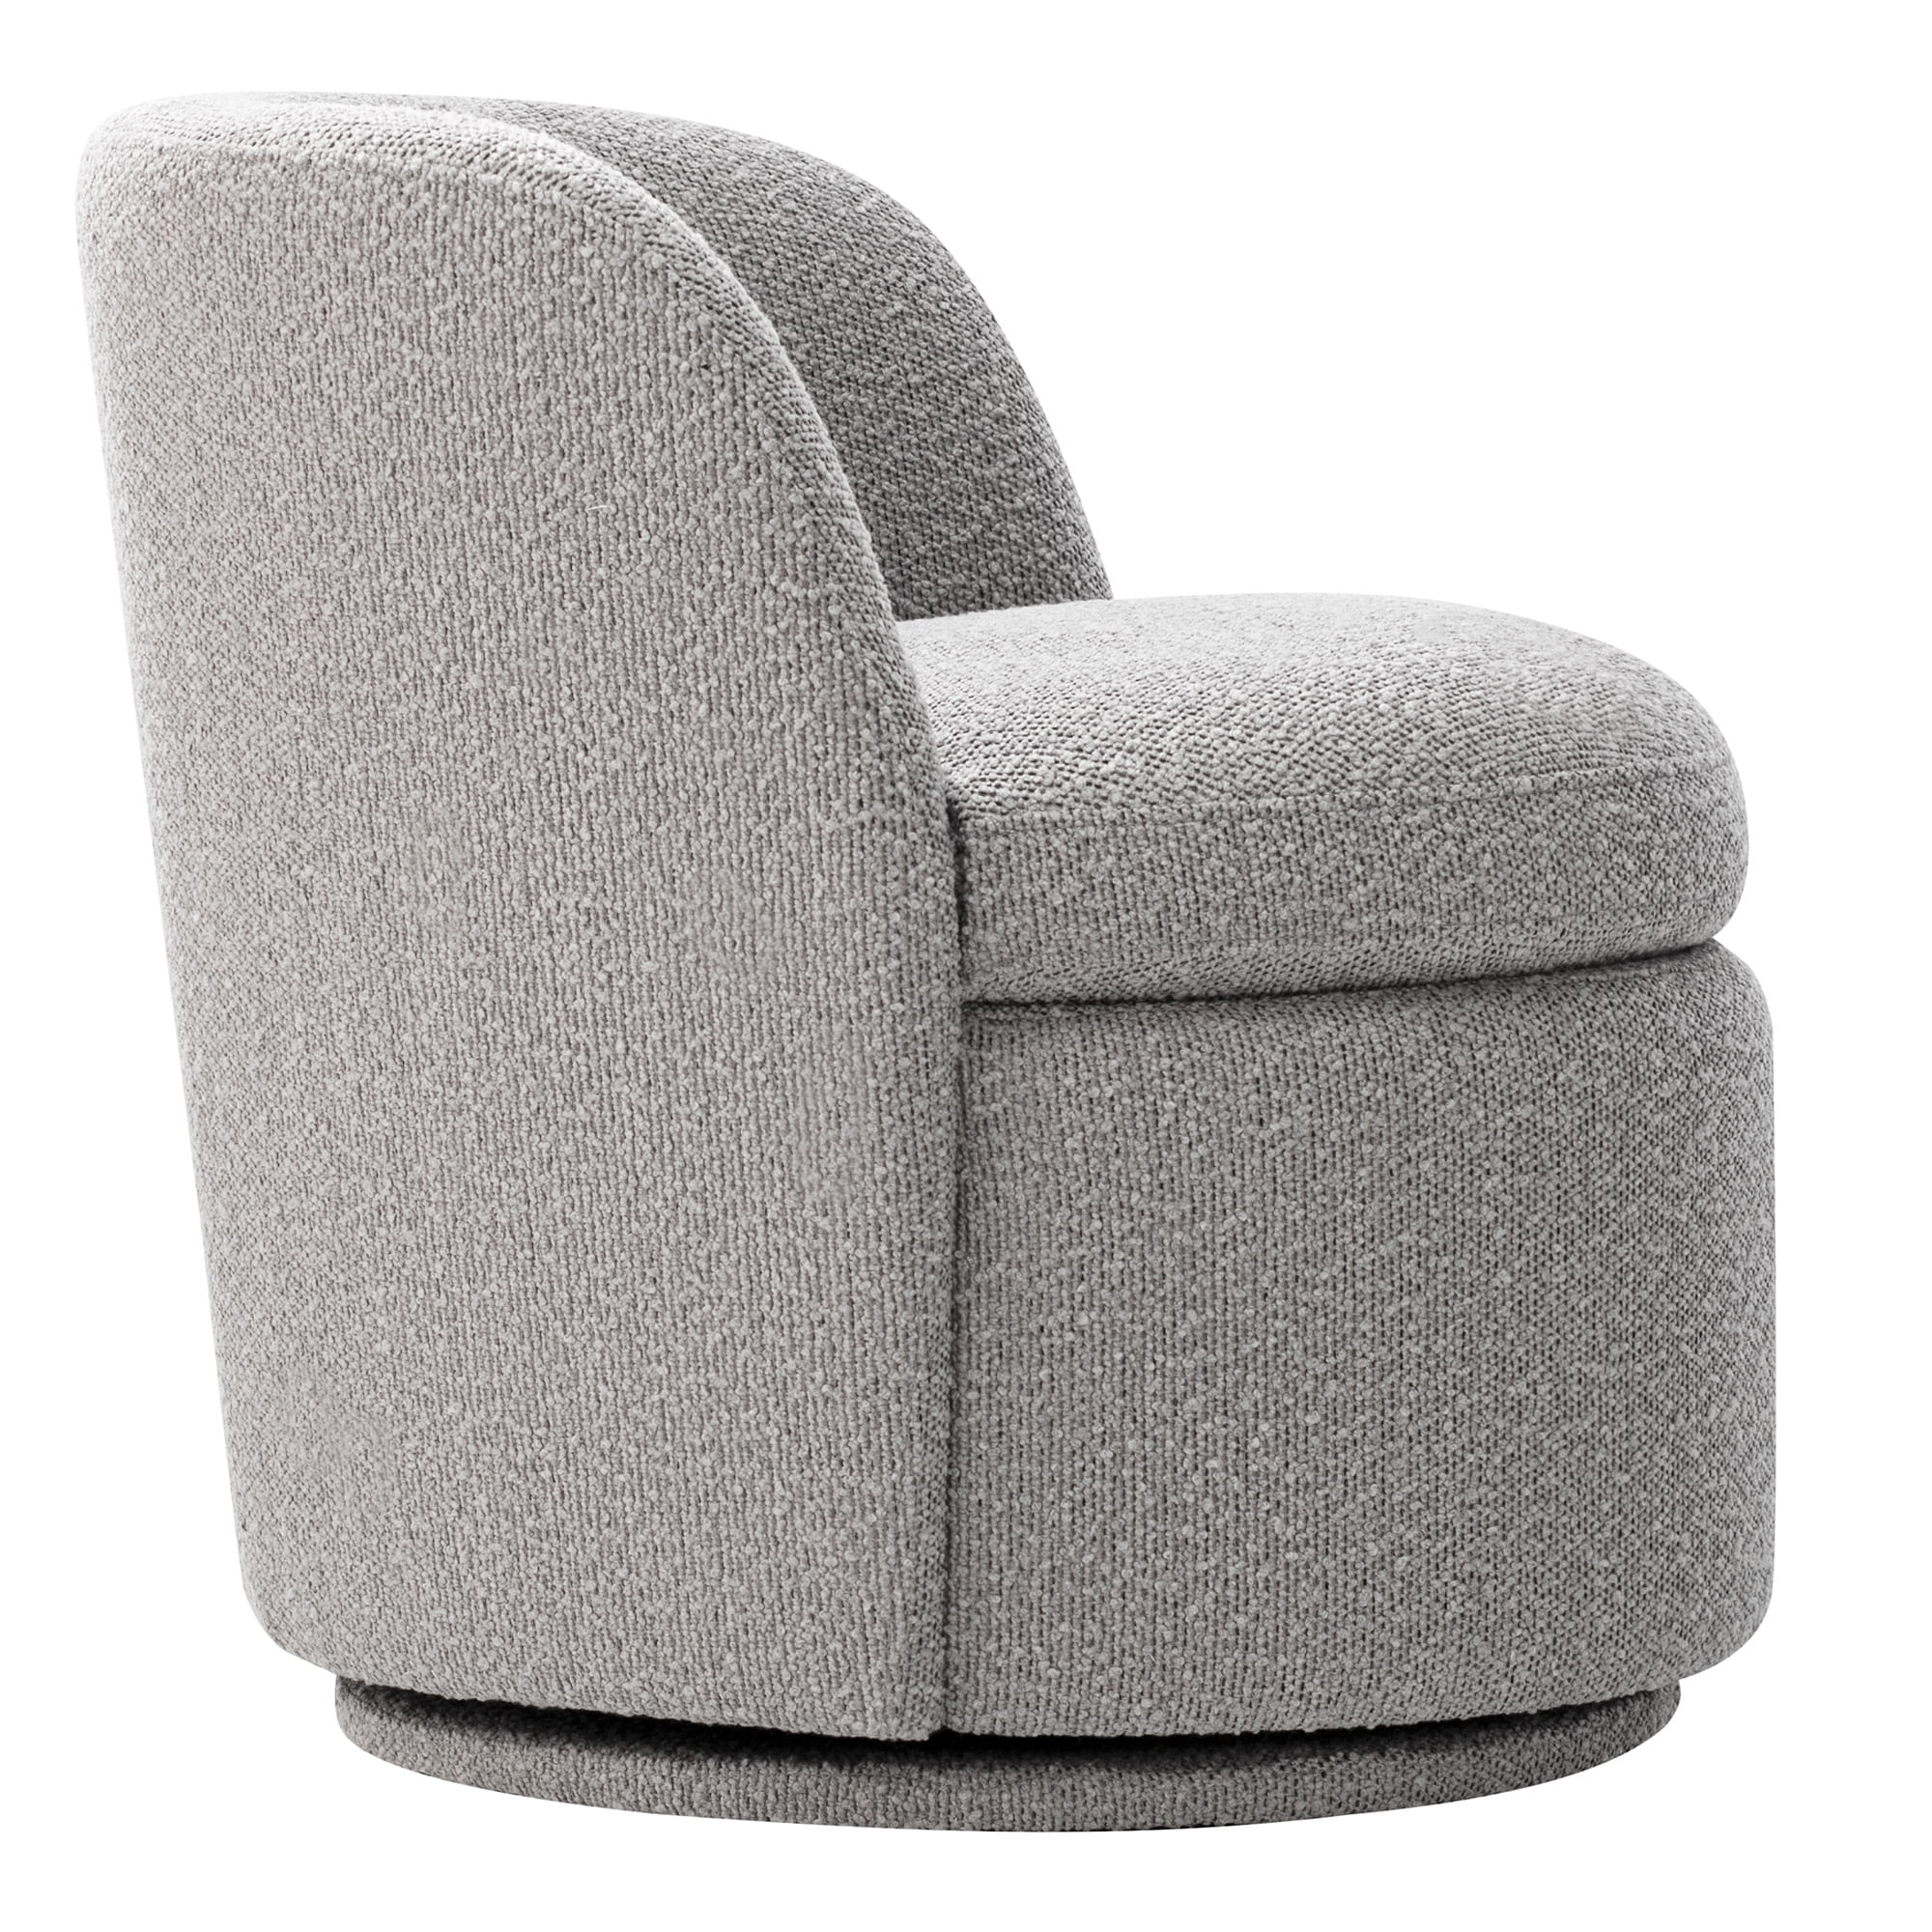 CHITA Swivel Accent Chair Armchair, Round Barrel Chairs in Fabric for Living Room Bedroom, Boucle Accent Chair, White